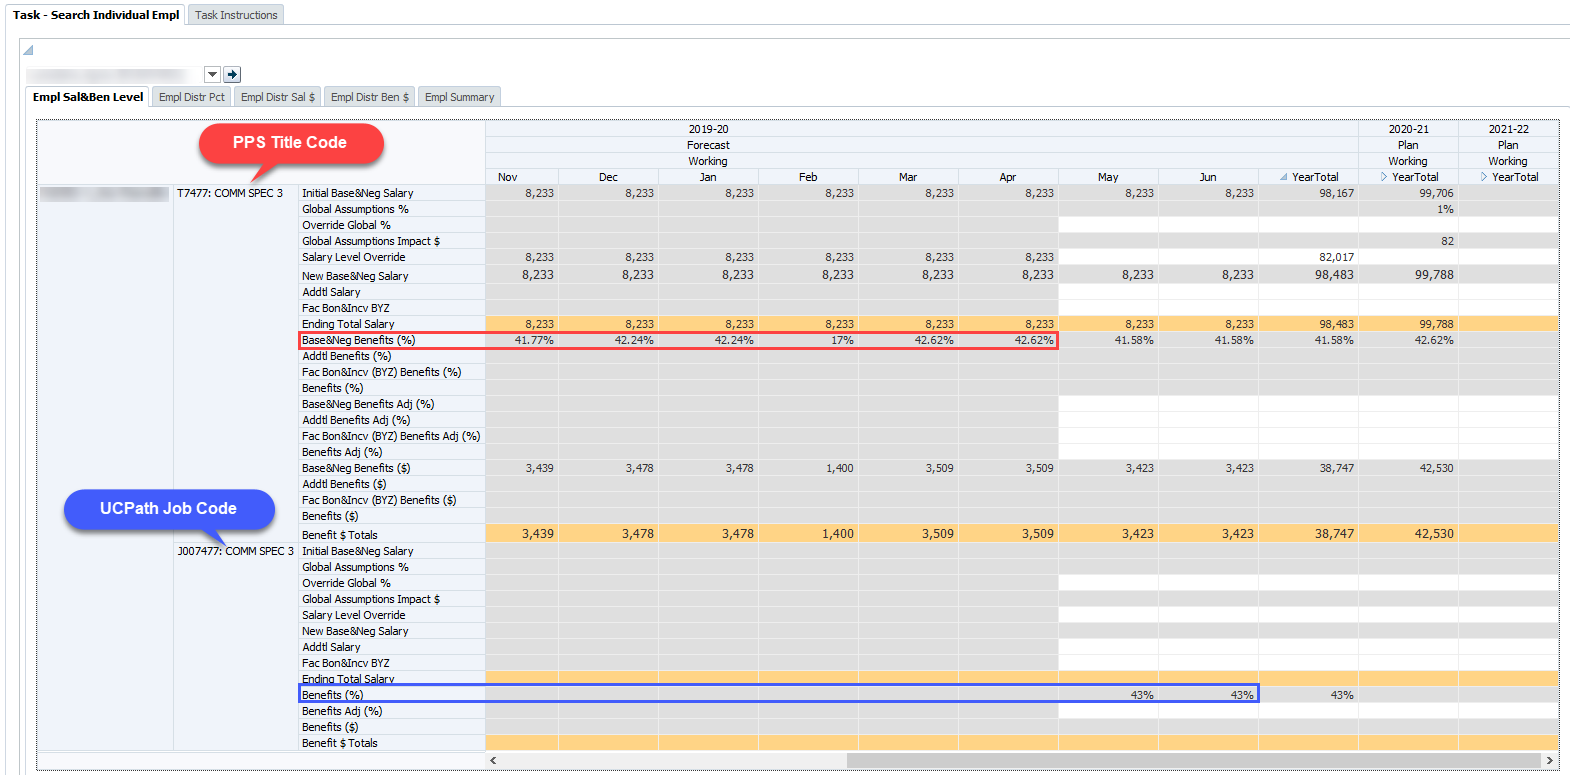 Screenshot of Employee Salary and Benefits Level form with PPS Title Code and UCPath Job Code